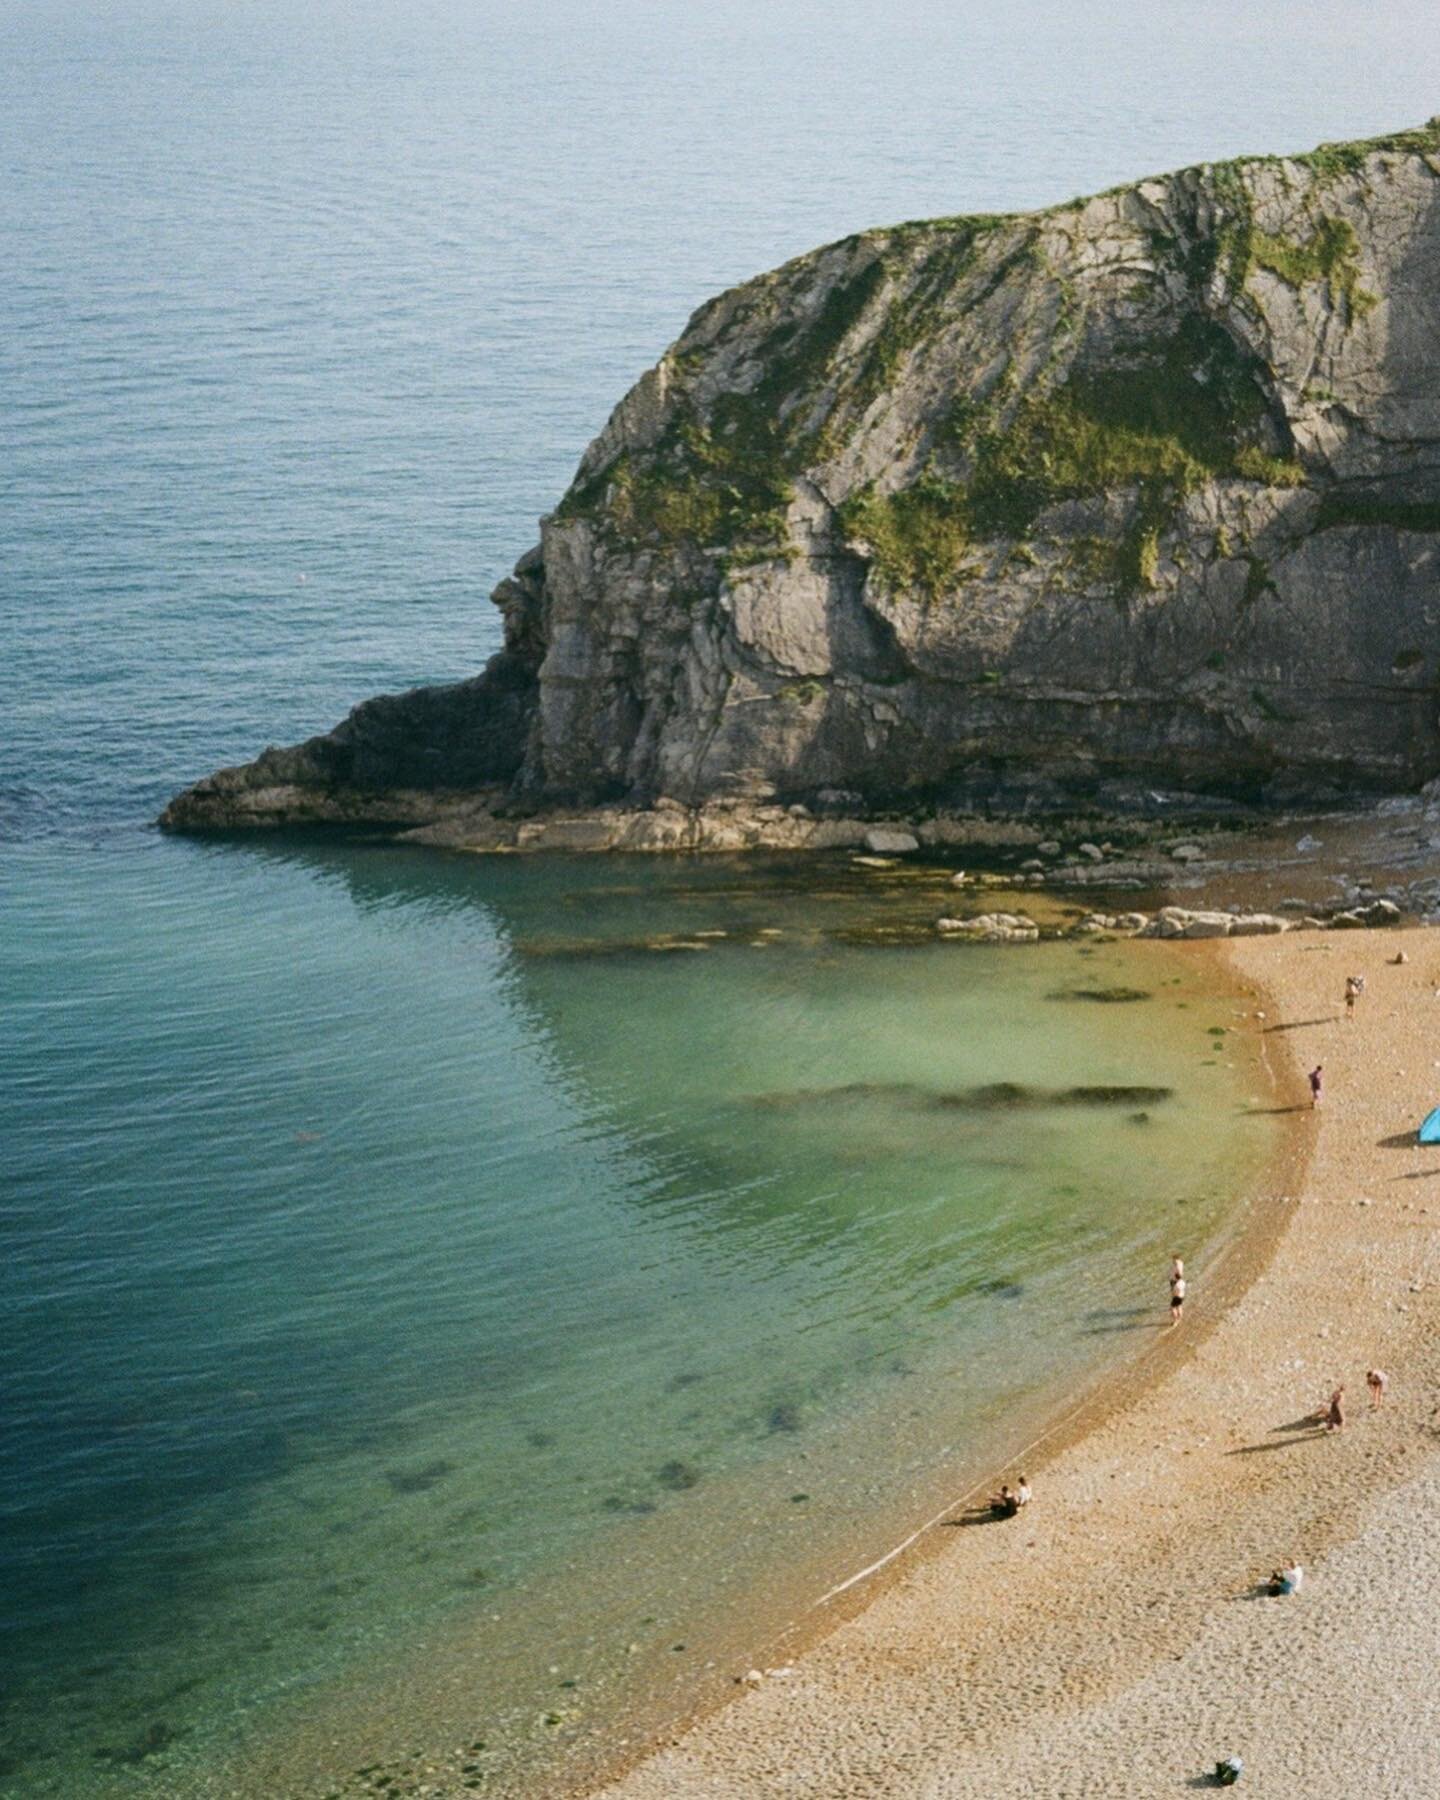 Shared my Dorset recos + photography with @condenasttraveller this week &mdash; hopefully you caught it on their Stories! Can&rsquo;t wait to go back this summer. On my list for this year are @allerdorset, @thebidecabin, @eweleazefarm campsite and @m